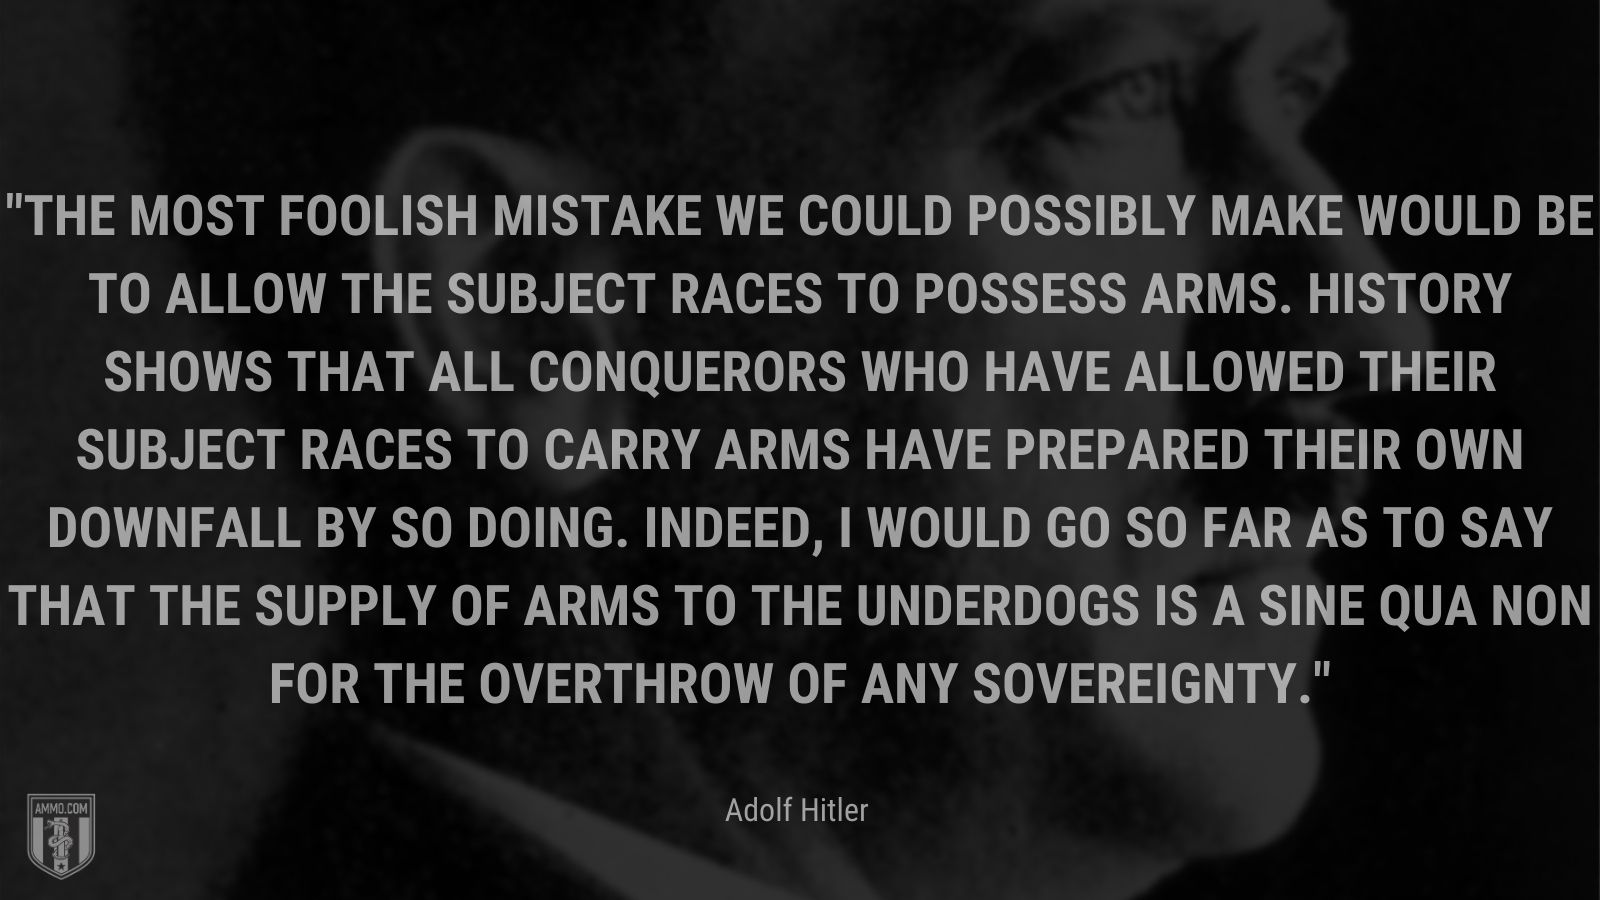 “The most foolish mistake we could possibly make would be to allow the subject races to possess arms. History shows that all conquerors who have allowed their subject races to carry arms have prepared their own downfall by so doing. Indeed, I would go so far as to say that the supply of arms to the underdogs is a sine qua non for the overthrow of any sovereignty.” - Adolf Hitler